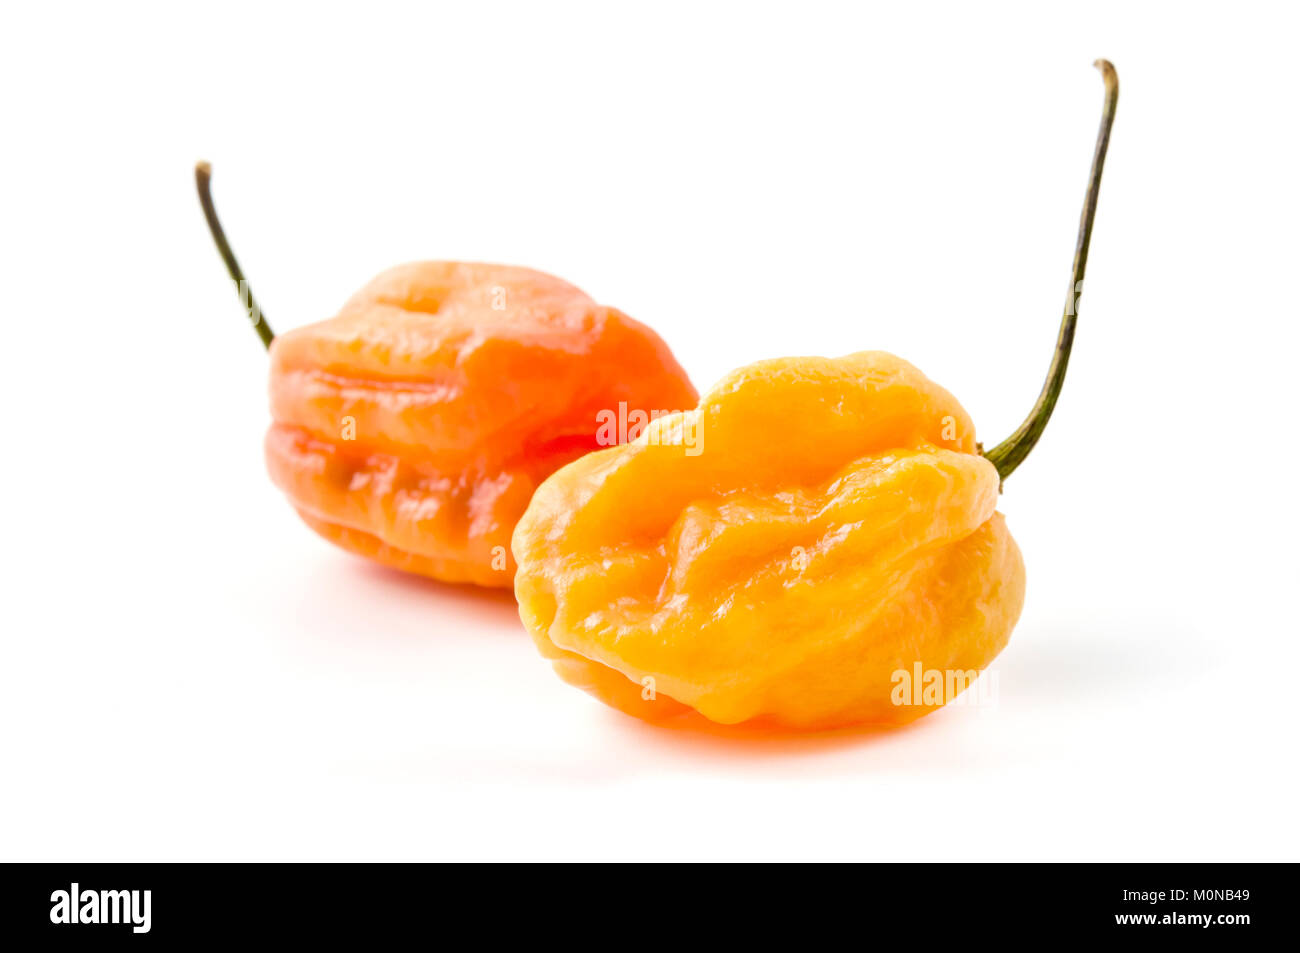 Fatalii Gourmet Jigsaw pepper on a white background Stock Photo